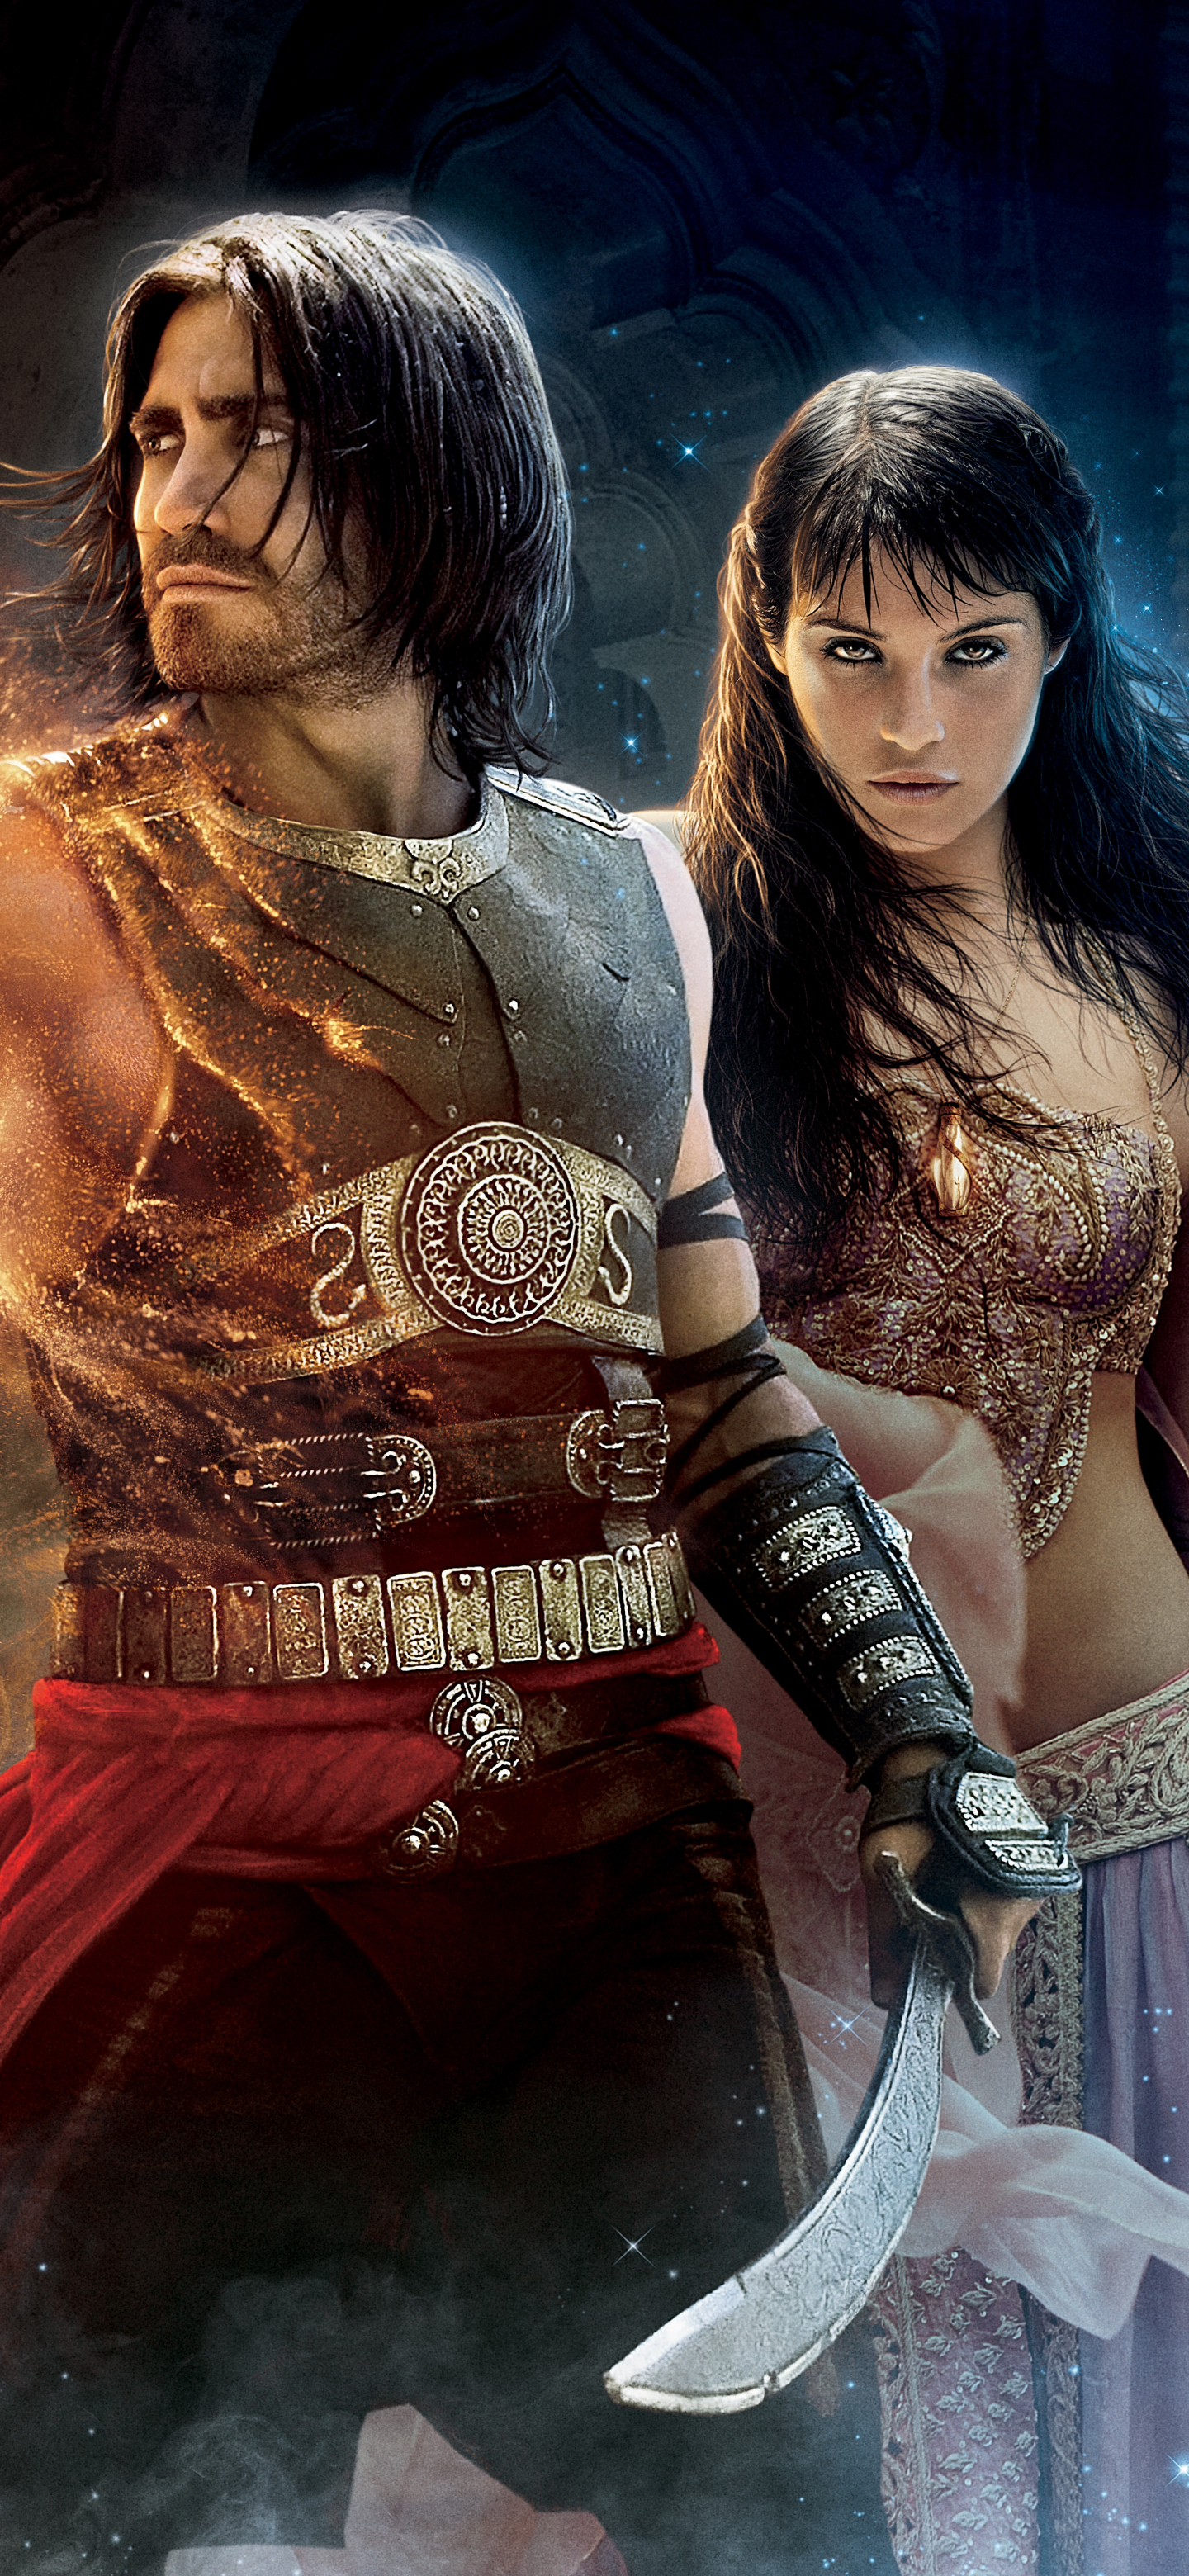 movie, prince of persia: the sands of time, gemma arterton, jake gyllenhaal, prince of persia